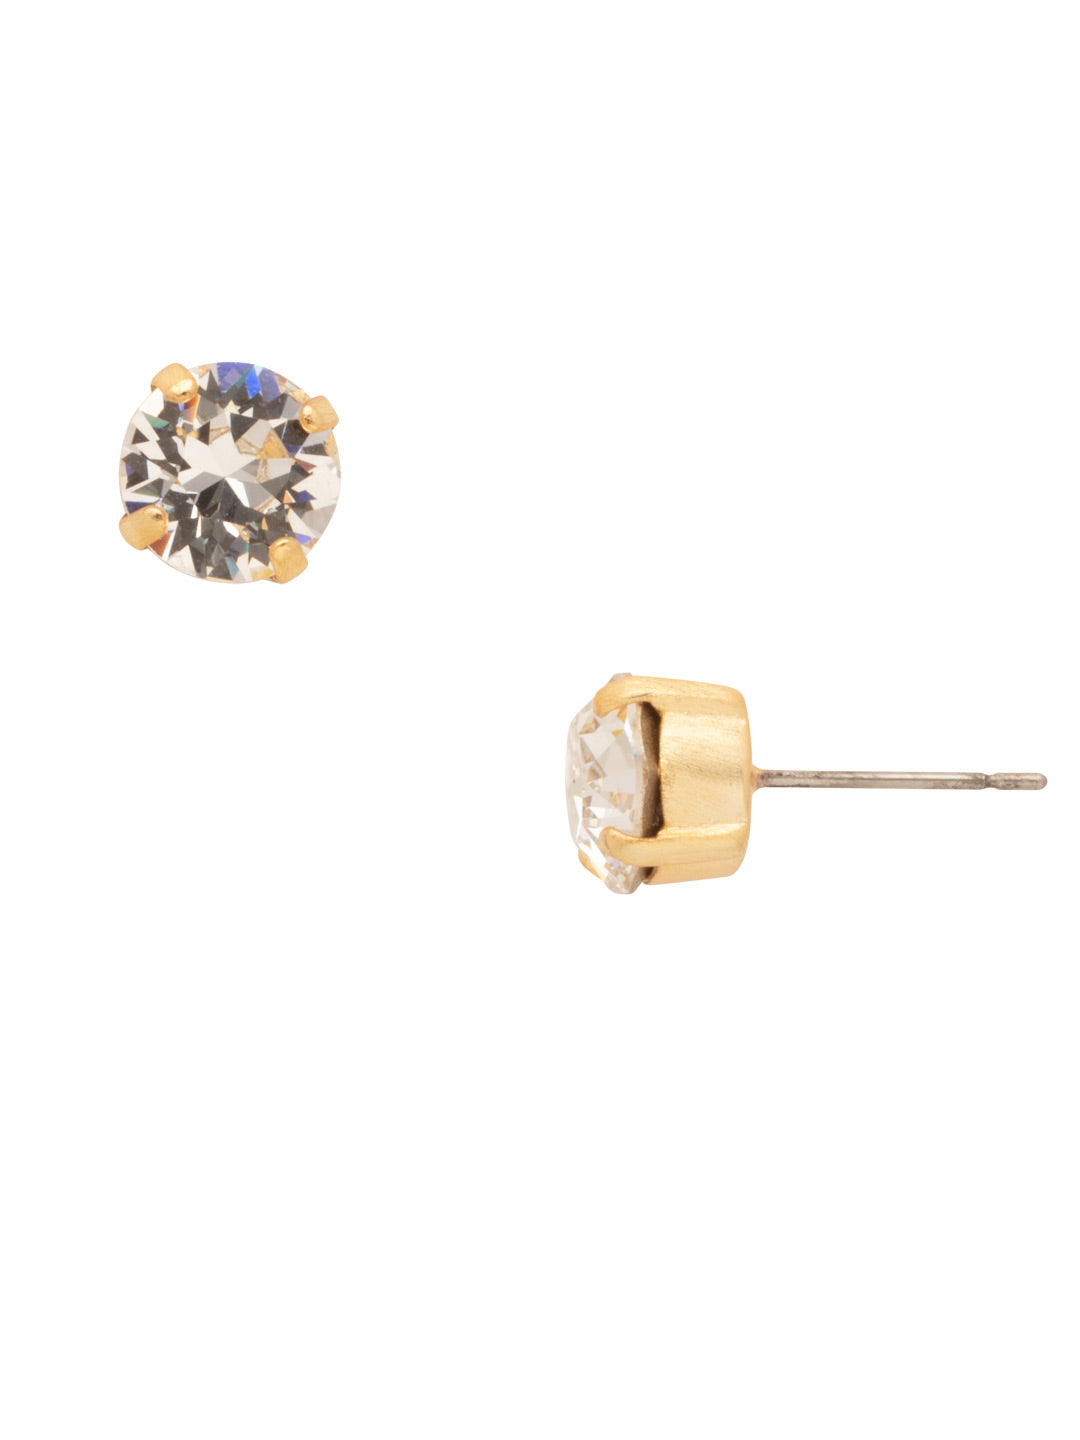 Simple Stud Earrings - EFC99MGCRY - <p>The Simple Stud Earrings feature a single solid crystal on a surgical steel post, creating a small but sparkly everyday staple! Need help picking a stud? <a href="https://www.sorrelli.com/blogs/sisterhood/round-stud-earrings-101-a-rundown-of-sizes-styles-and-sparkle">Check out our size guide!</a> From Sorrelli's Crystal collection in our Matte Gold-tone finish.</p>